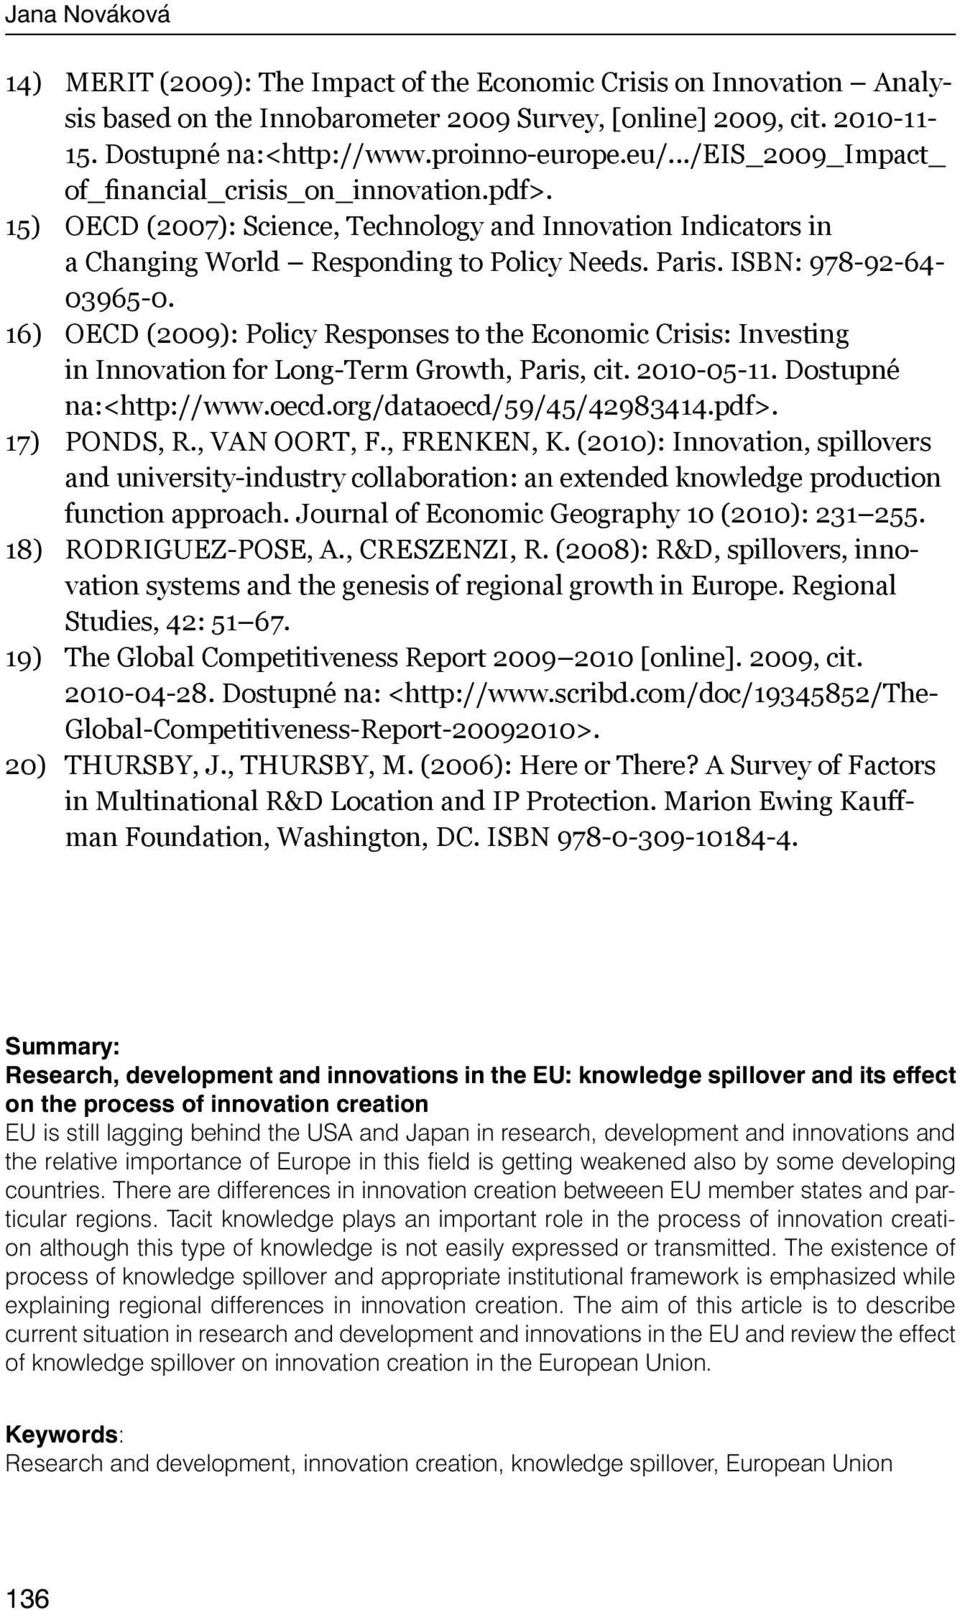 ISBN: 978-92-64-03965-0. 16) OECD (2009): Policy Responses to the Economic Crisis: Investing in Innovation for Long-Term Growth, Paris, cit. 2010-05-11. Dostupné na:<http://www.oecd.